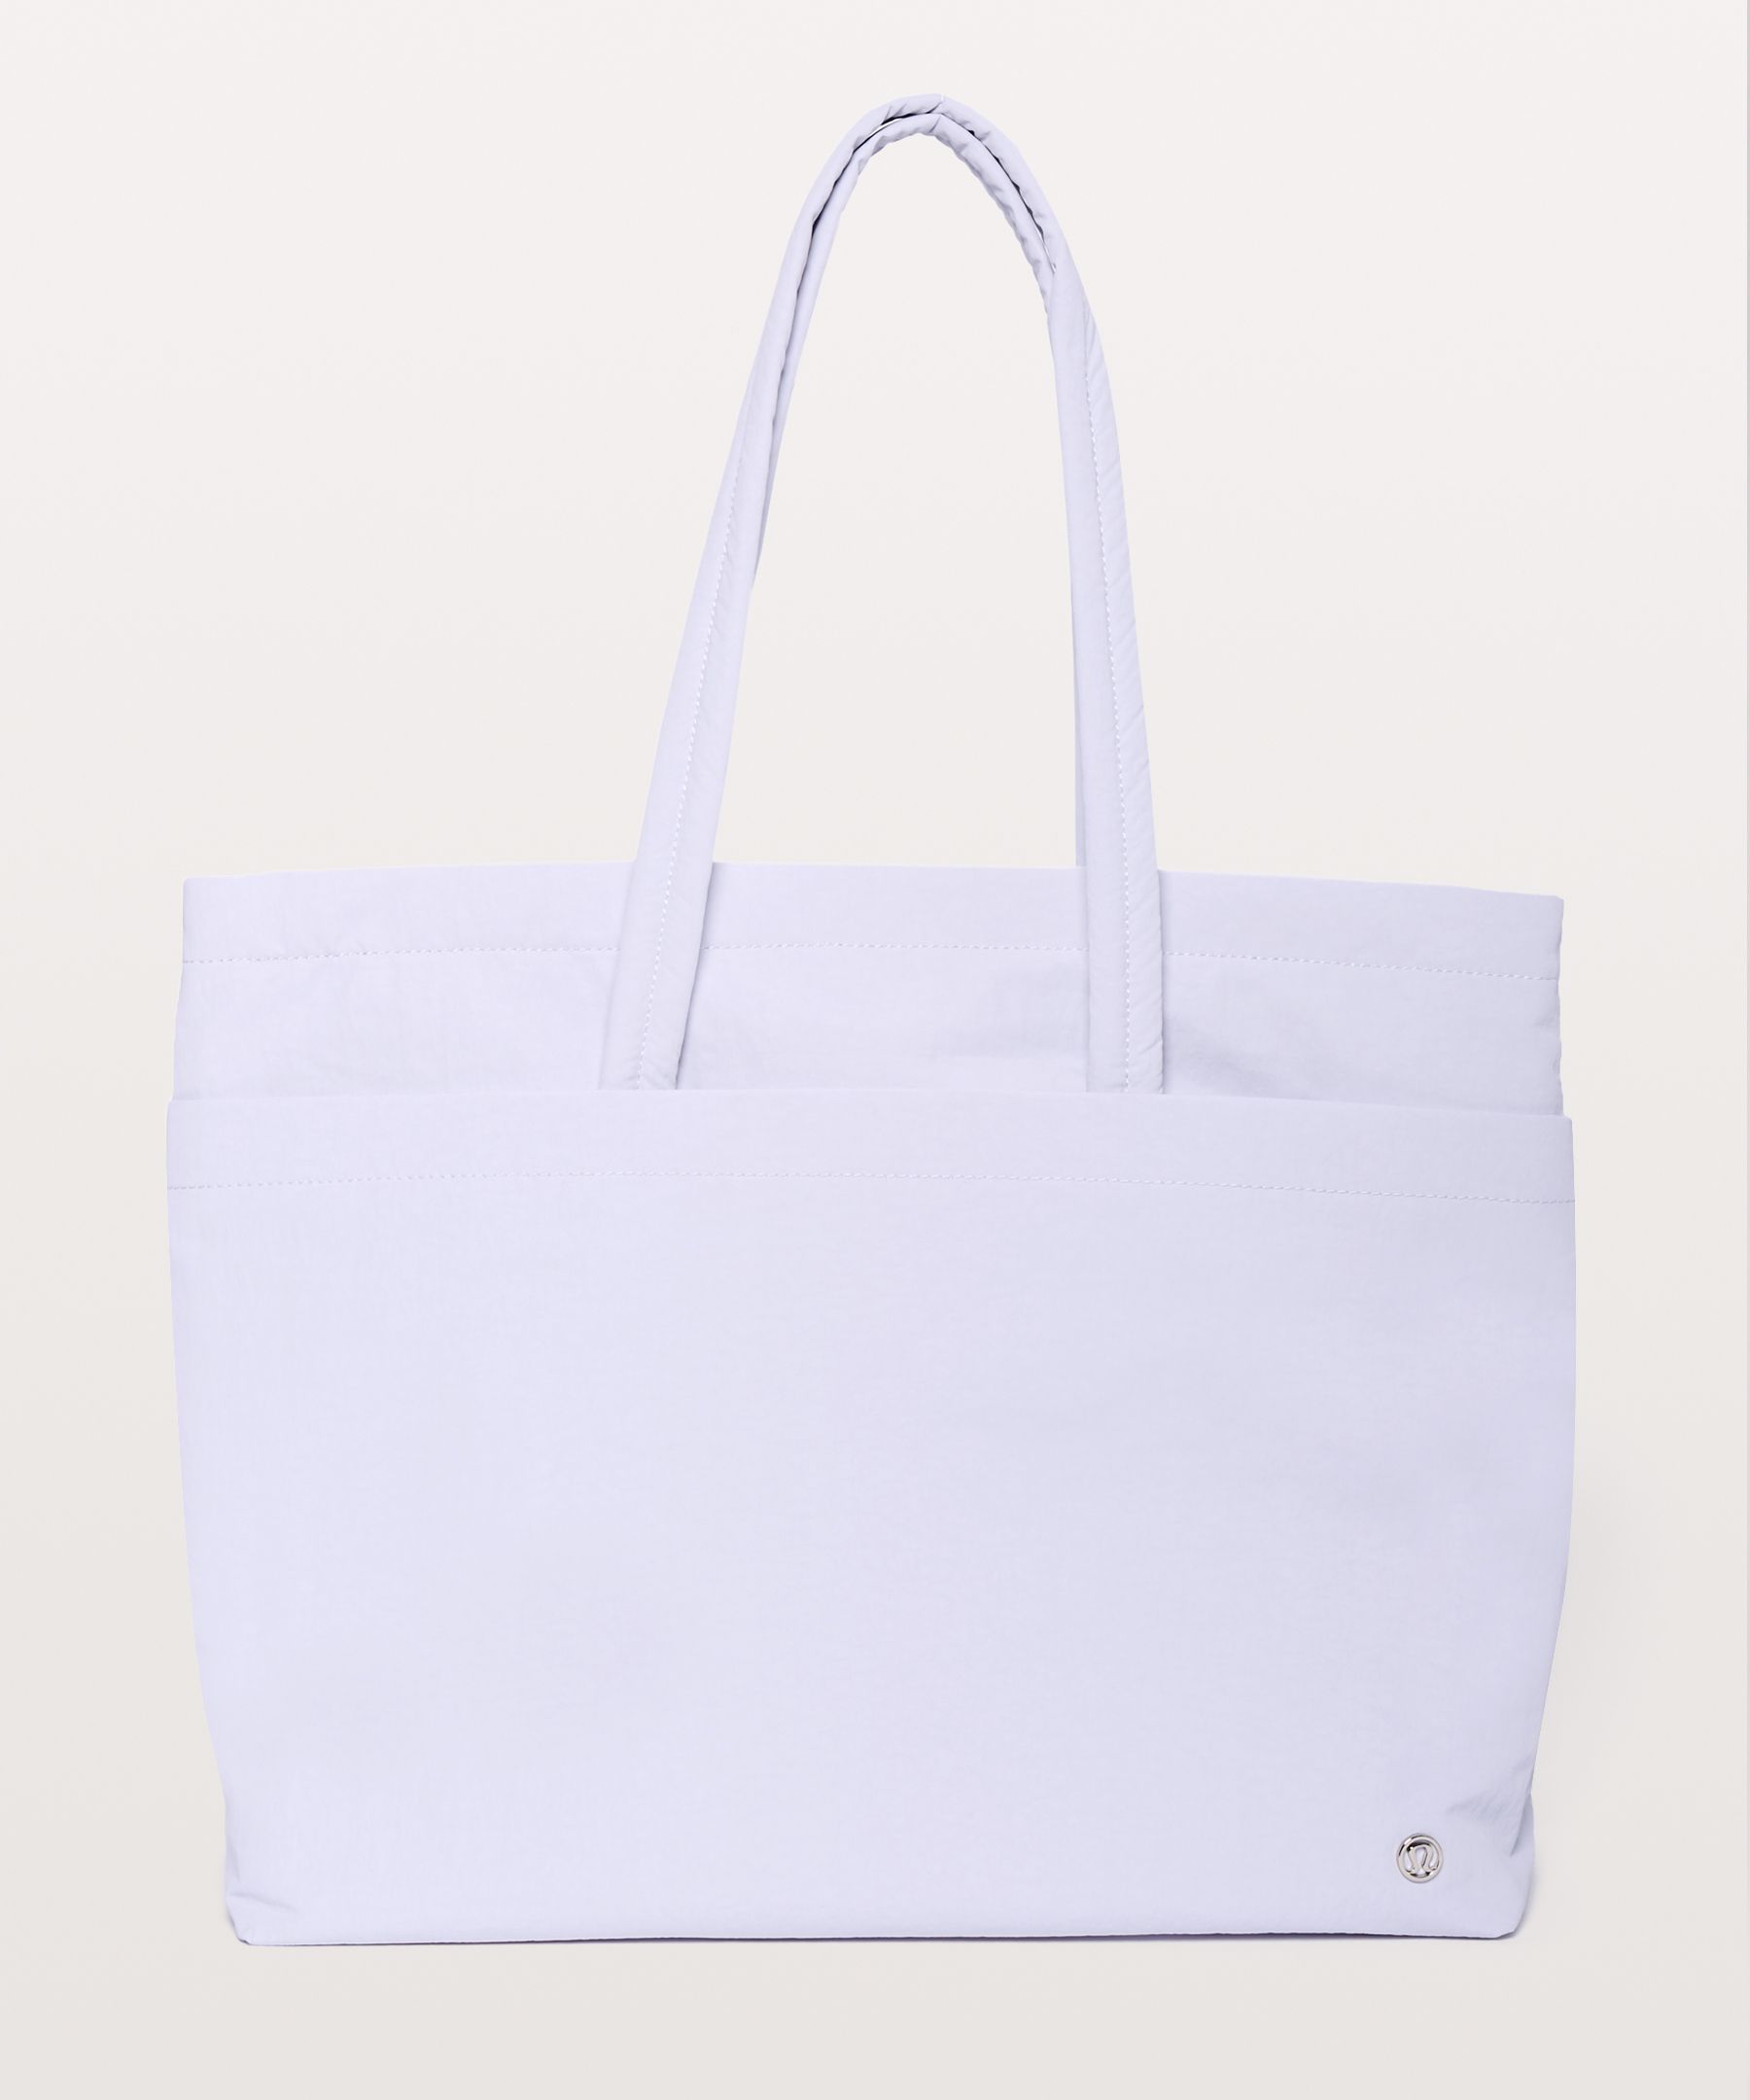 Lululemon On My Level Tote Large In Blue